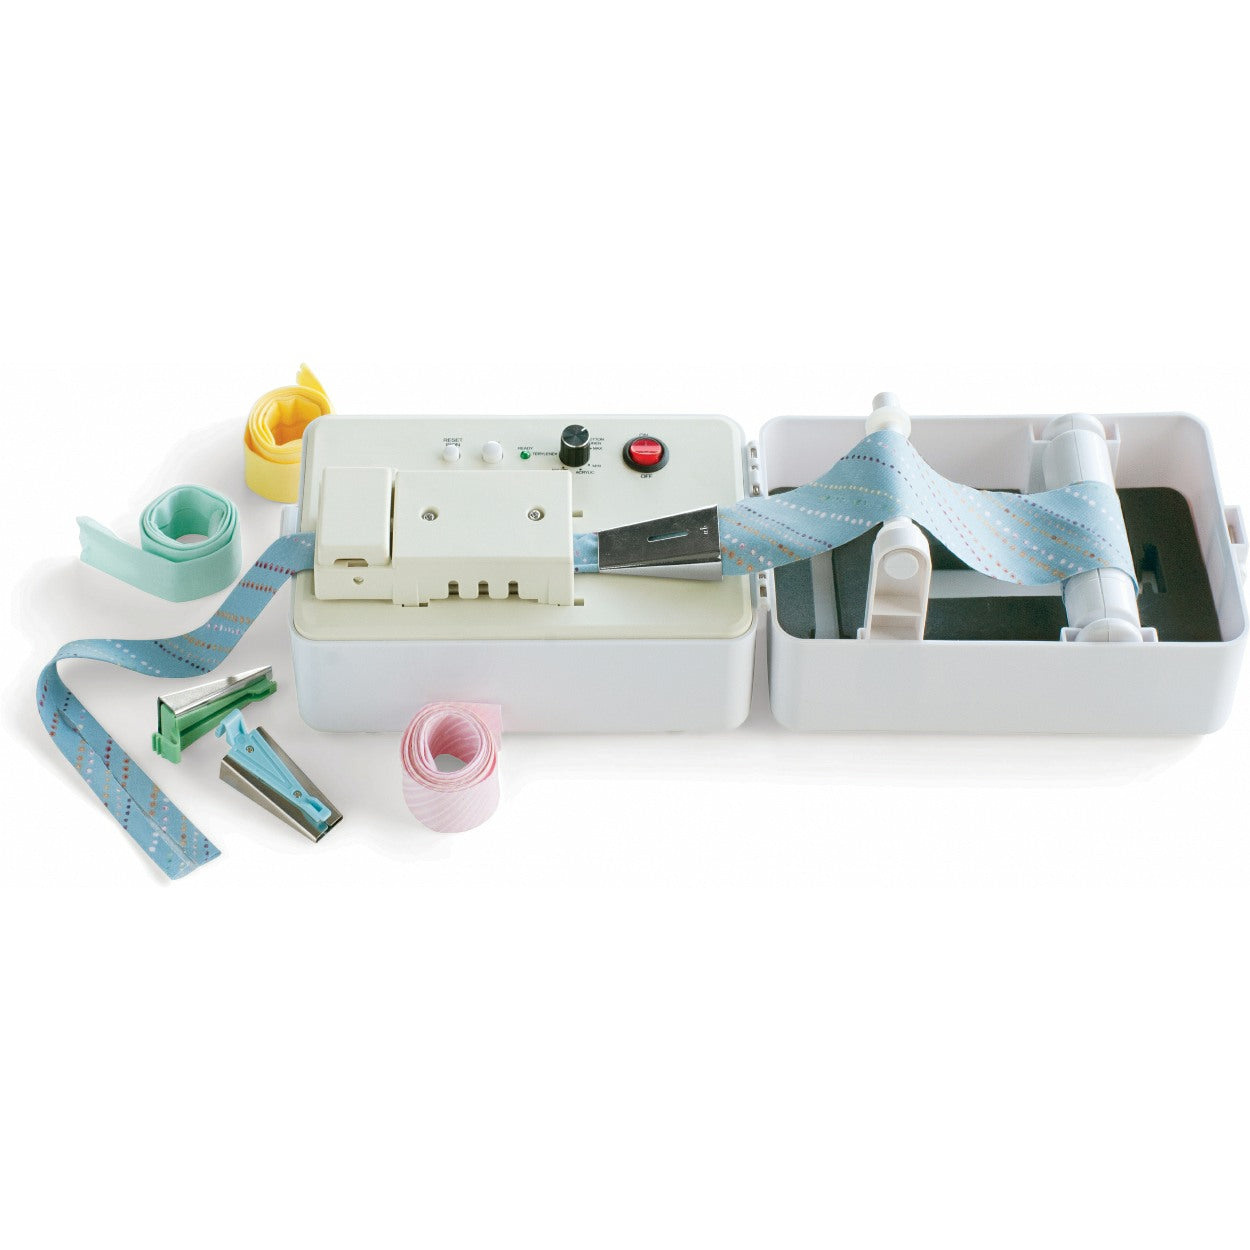 Simplicity Bias Tape Maker Machine from Jaycotts Sewing Supplies